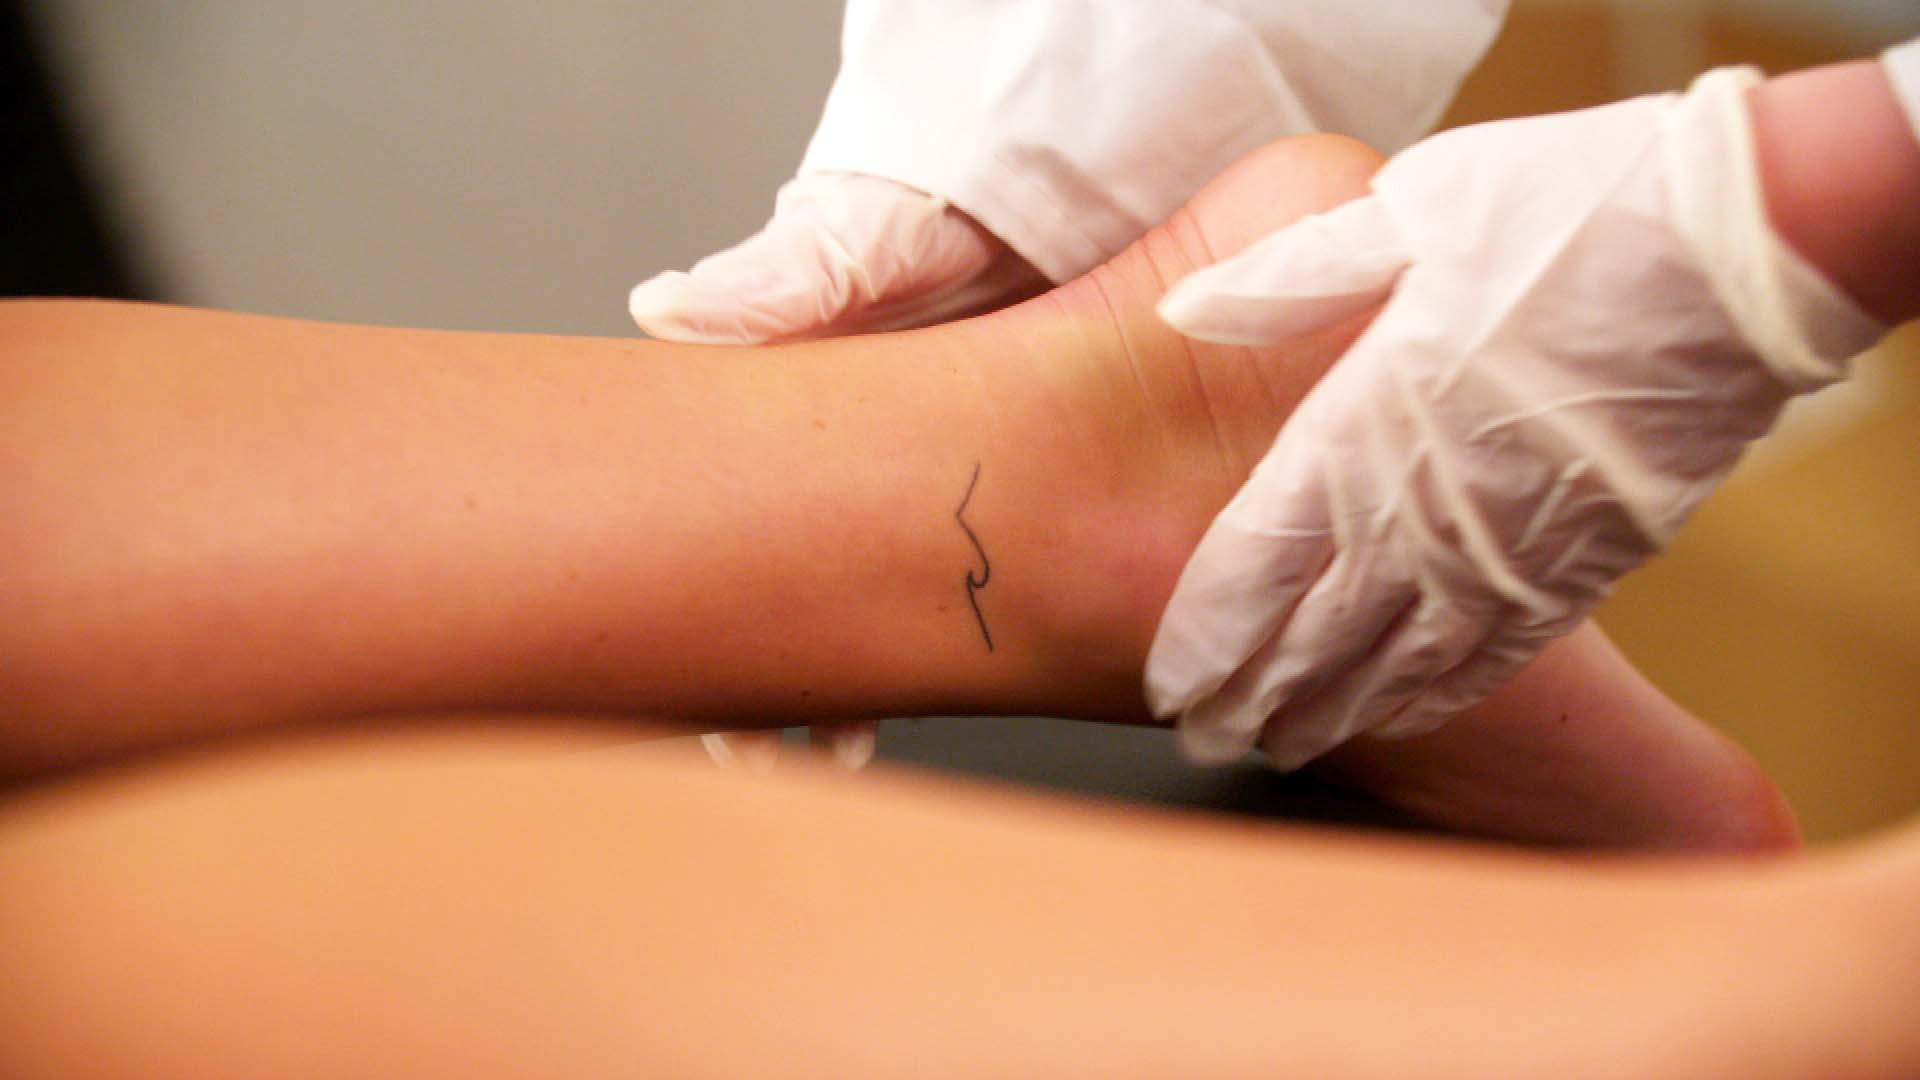 Hair removal clinic lasers woman's tattoo by mistake